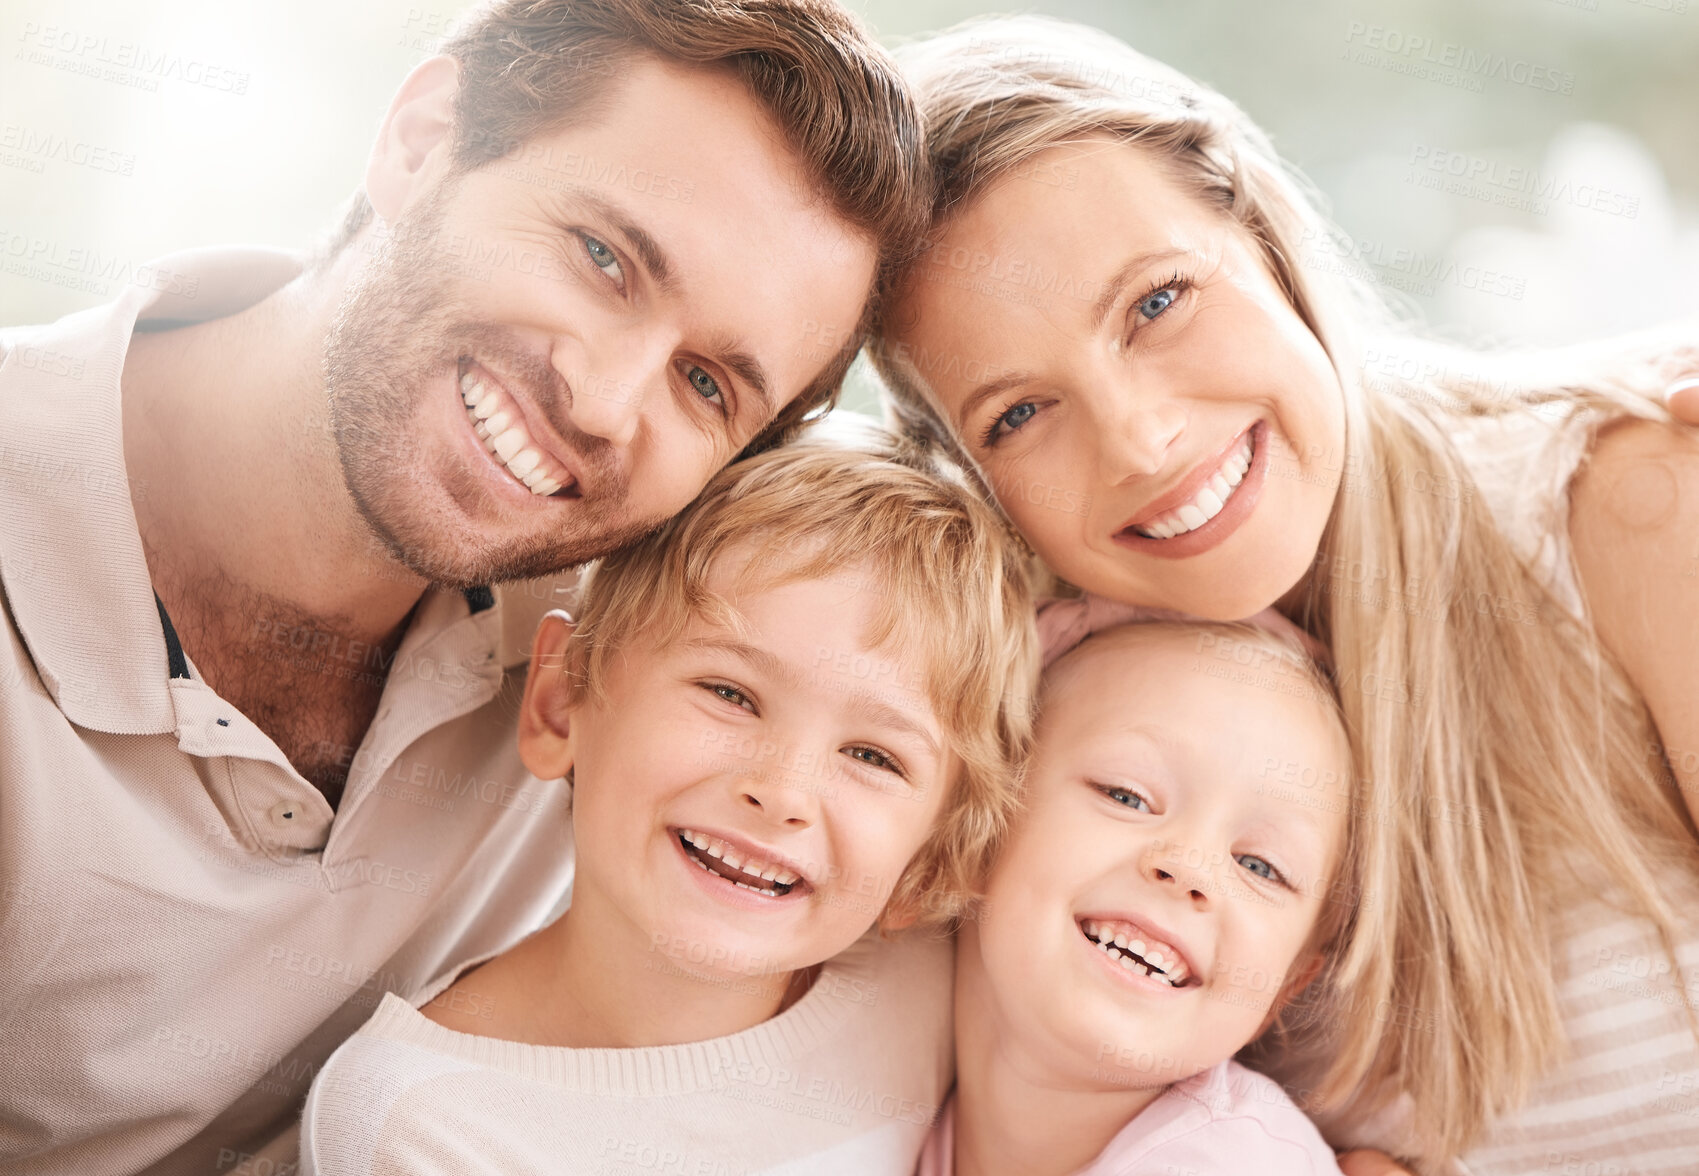 Buy stock photo Happy family in a portrait together for summer, outdoor wellness and holiday with mother, father and children. Love, care and smile face of people or kids with mom, dad or parents with sunshine bokeh